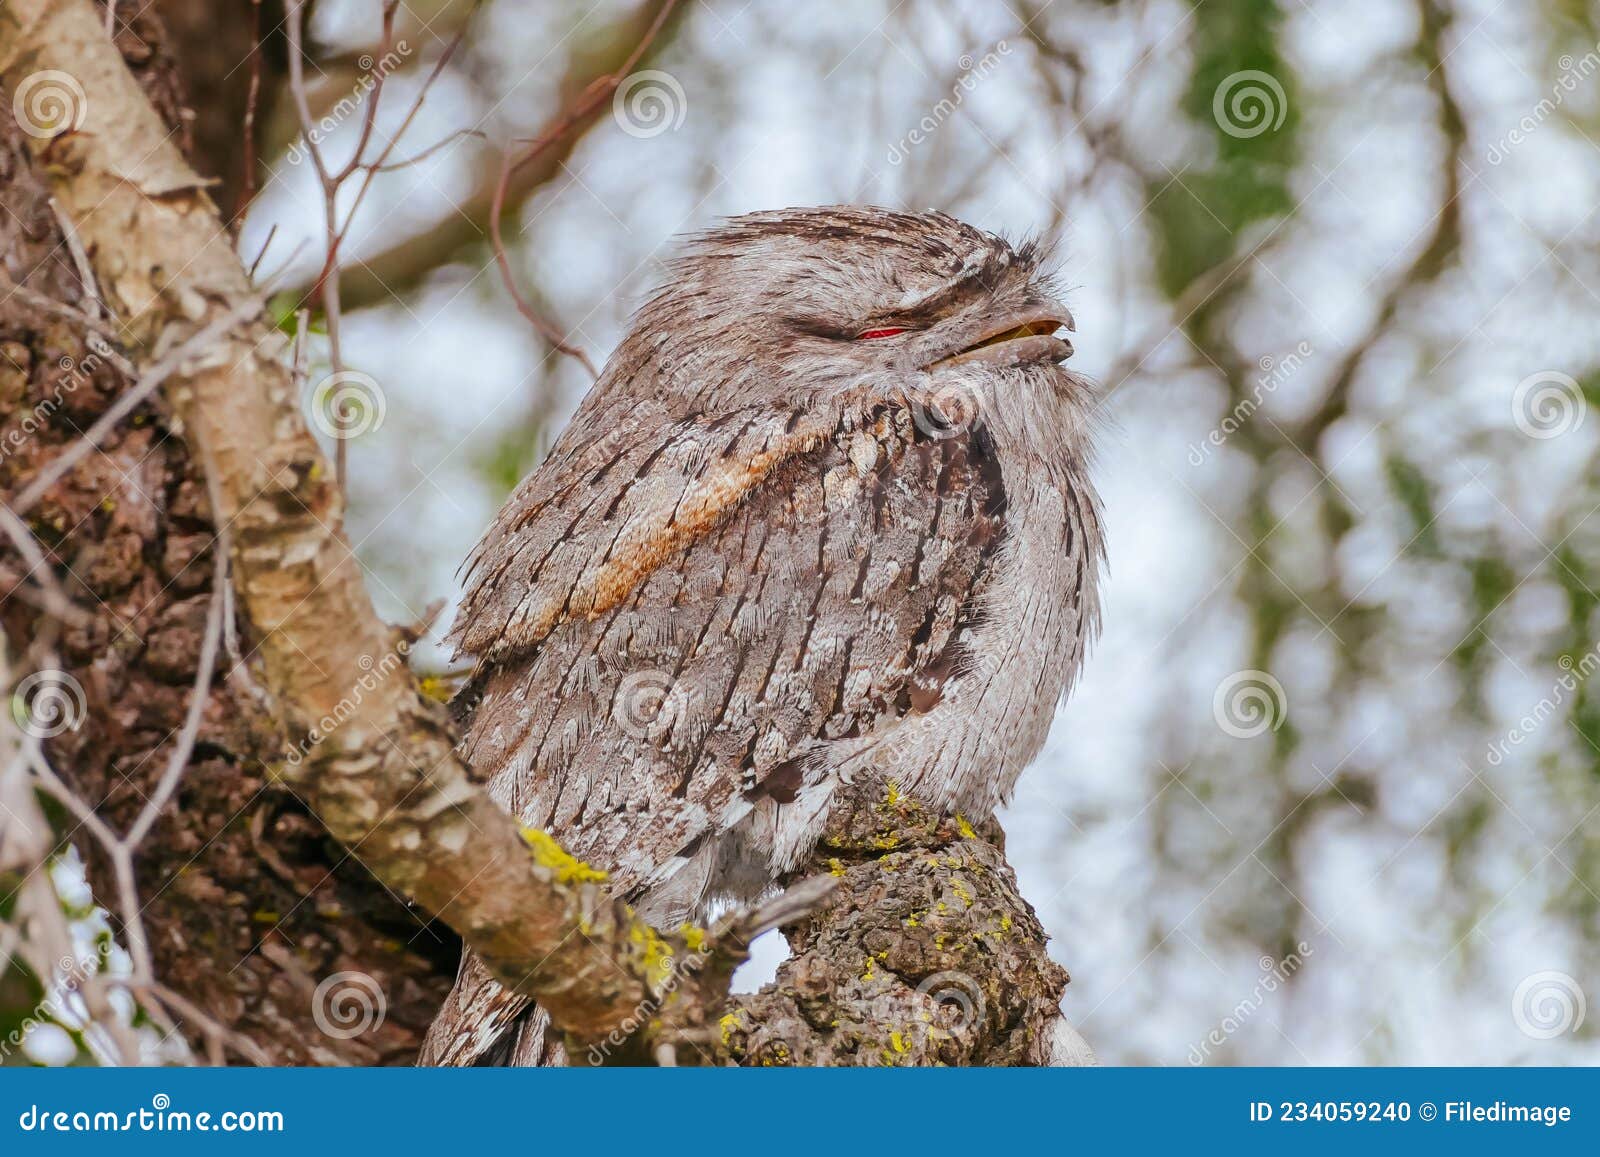 Tawny Frogmouth in Australia Stock Photo - Image of tree, branch: 234059240